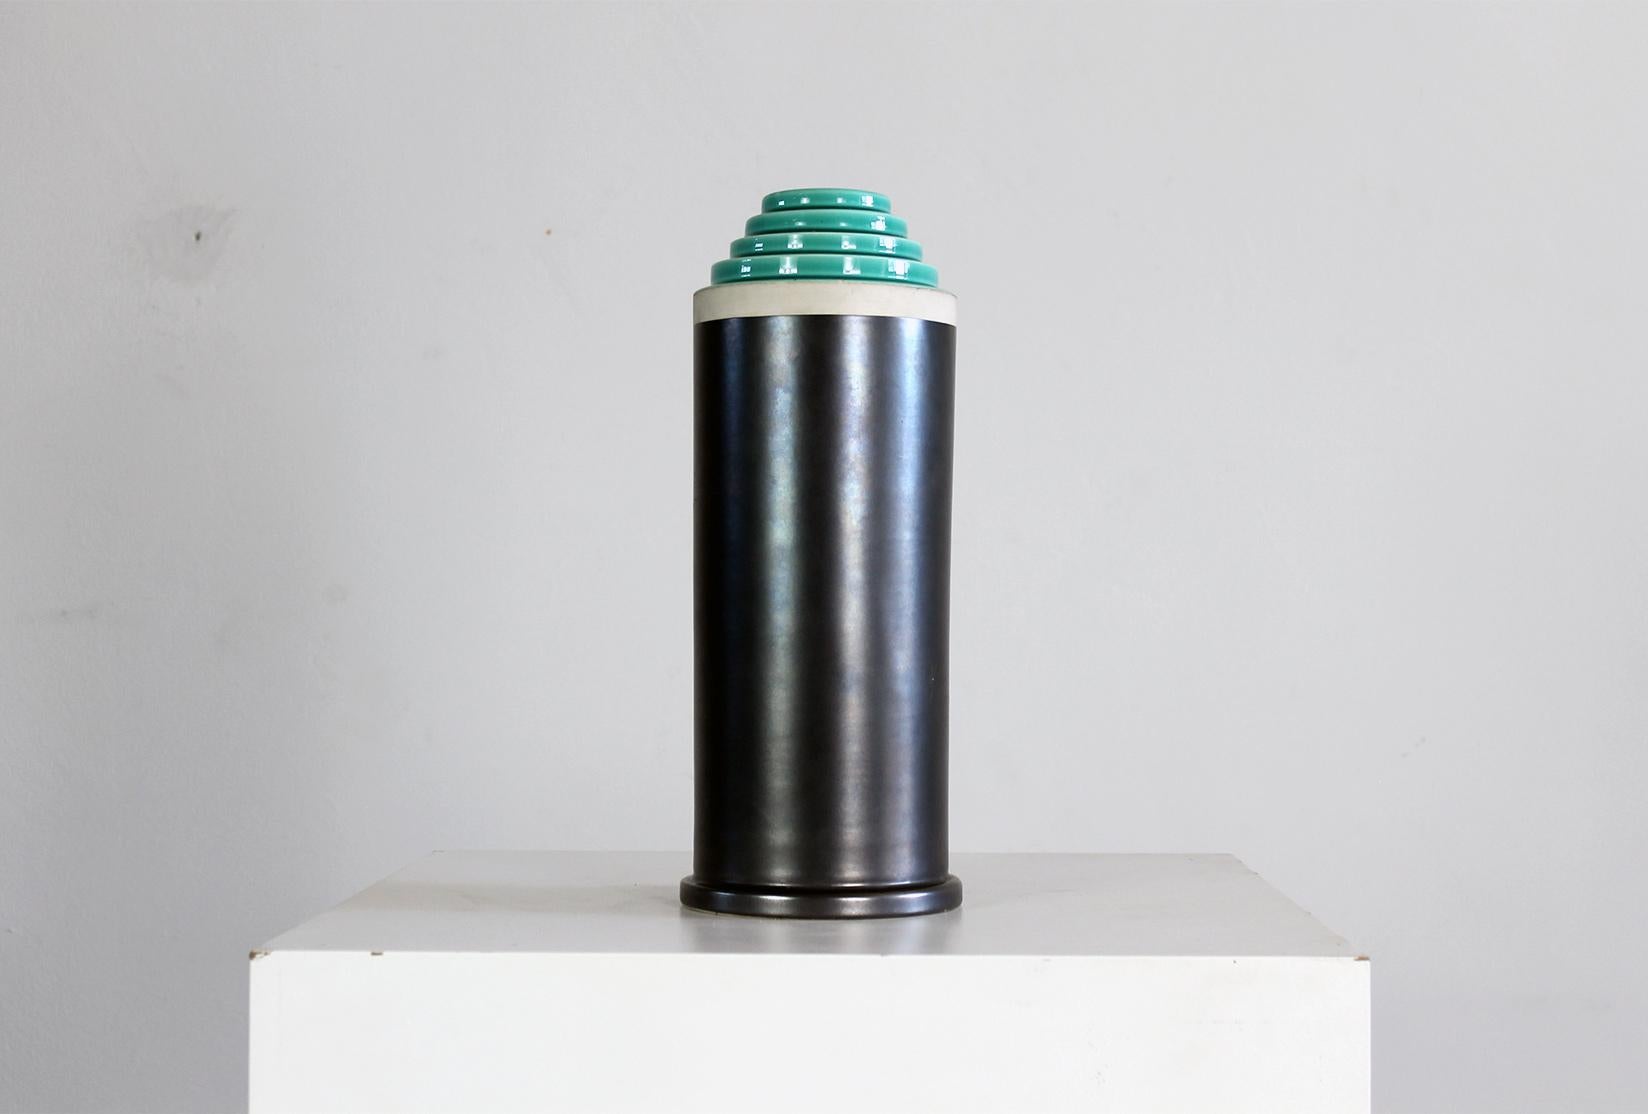 Italian Ettore Sottsass Vase from Stepped Series in Enameled Ceramic by Bitossi 1990s For Sale